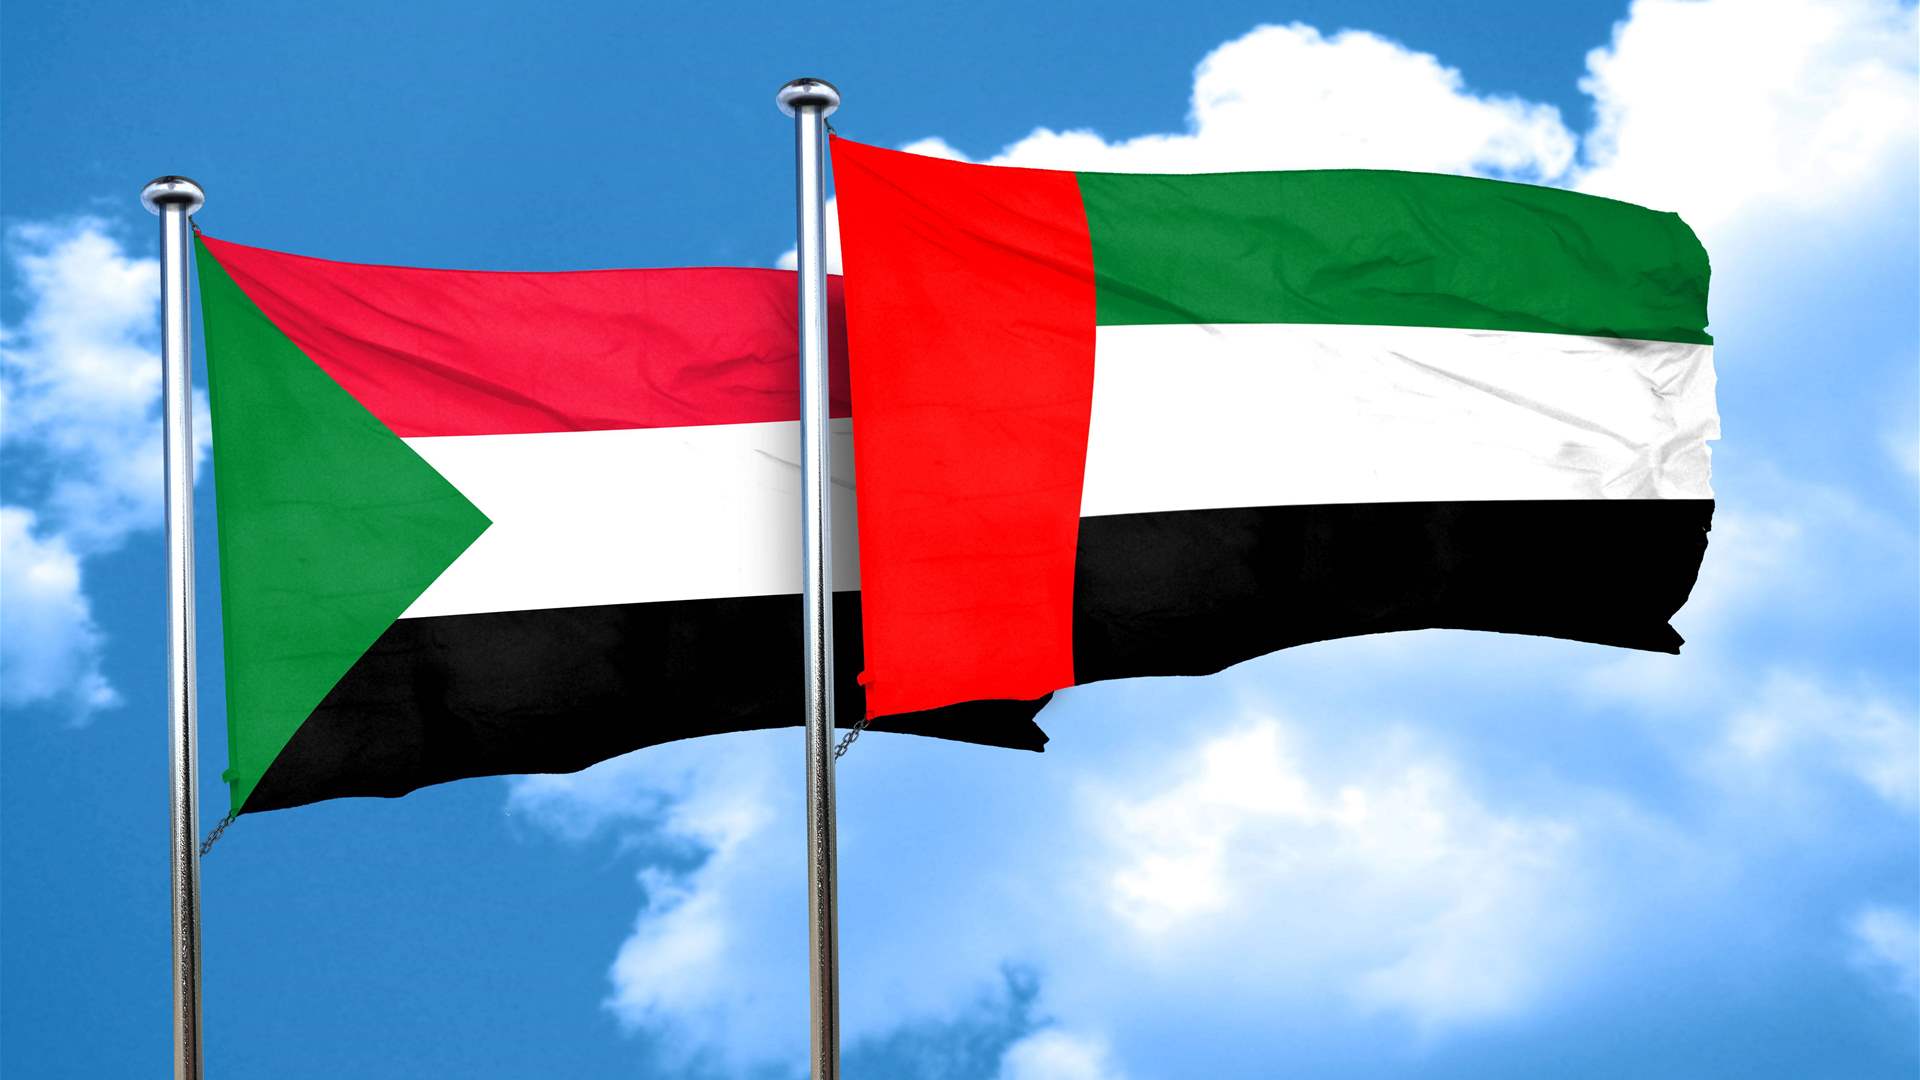 UAE president extends support to Sudan to end crisis